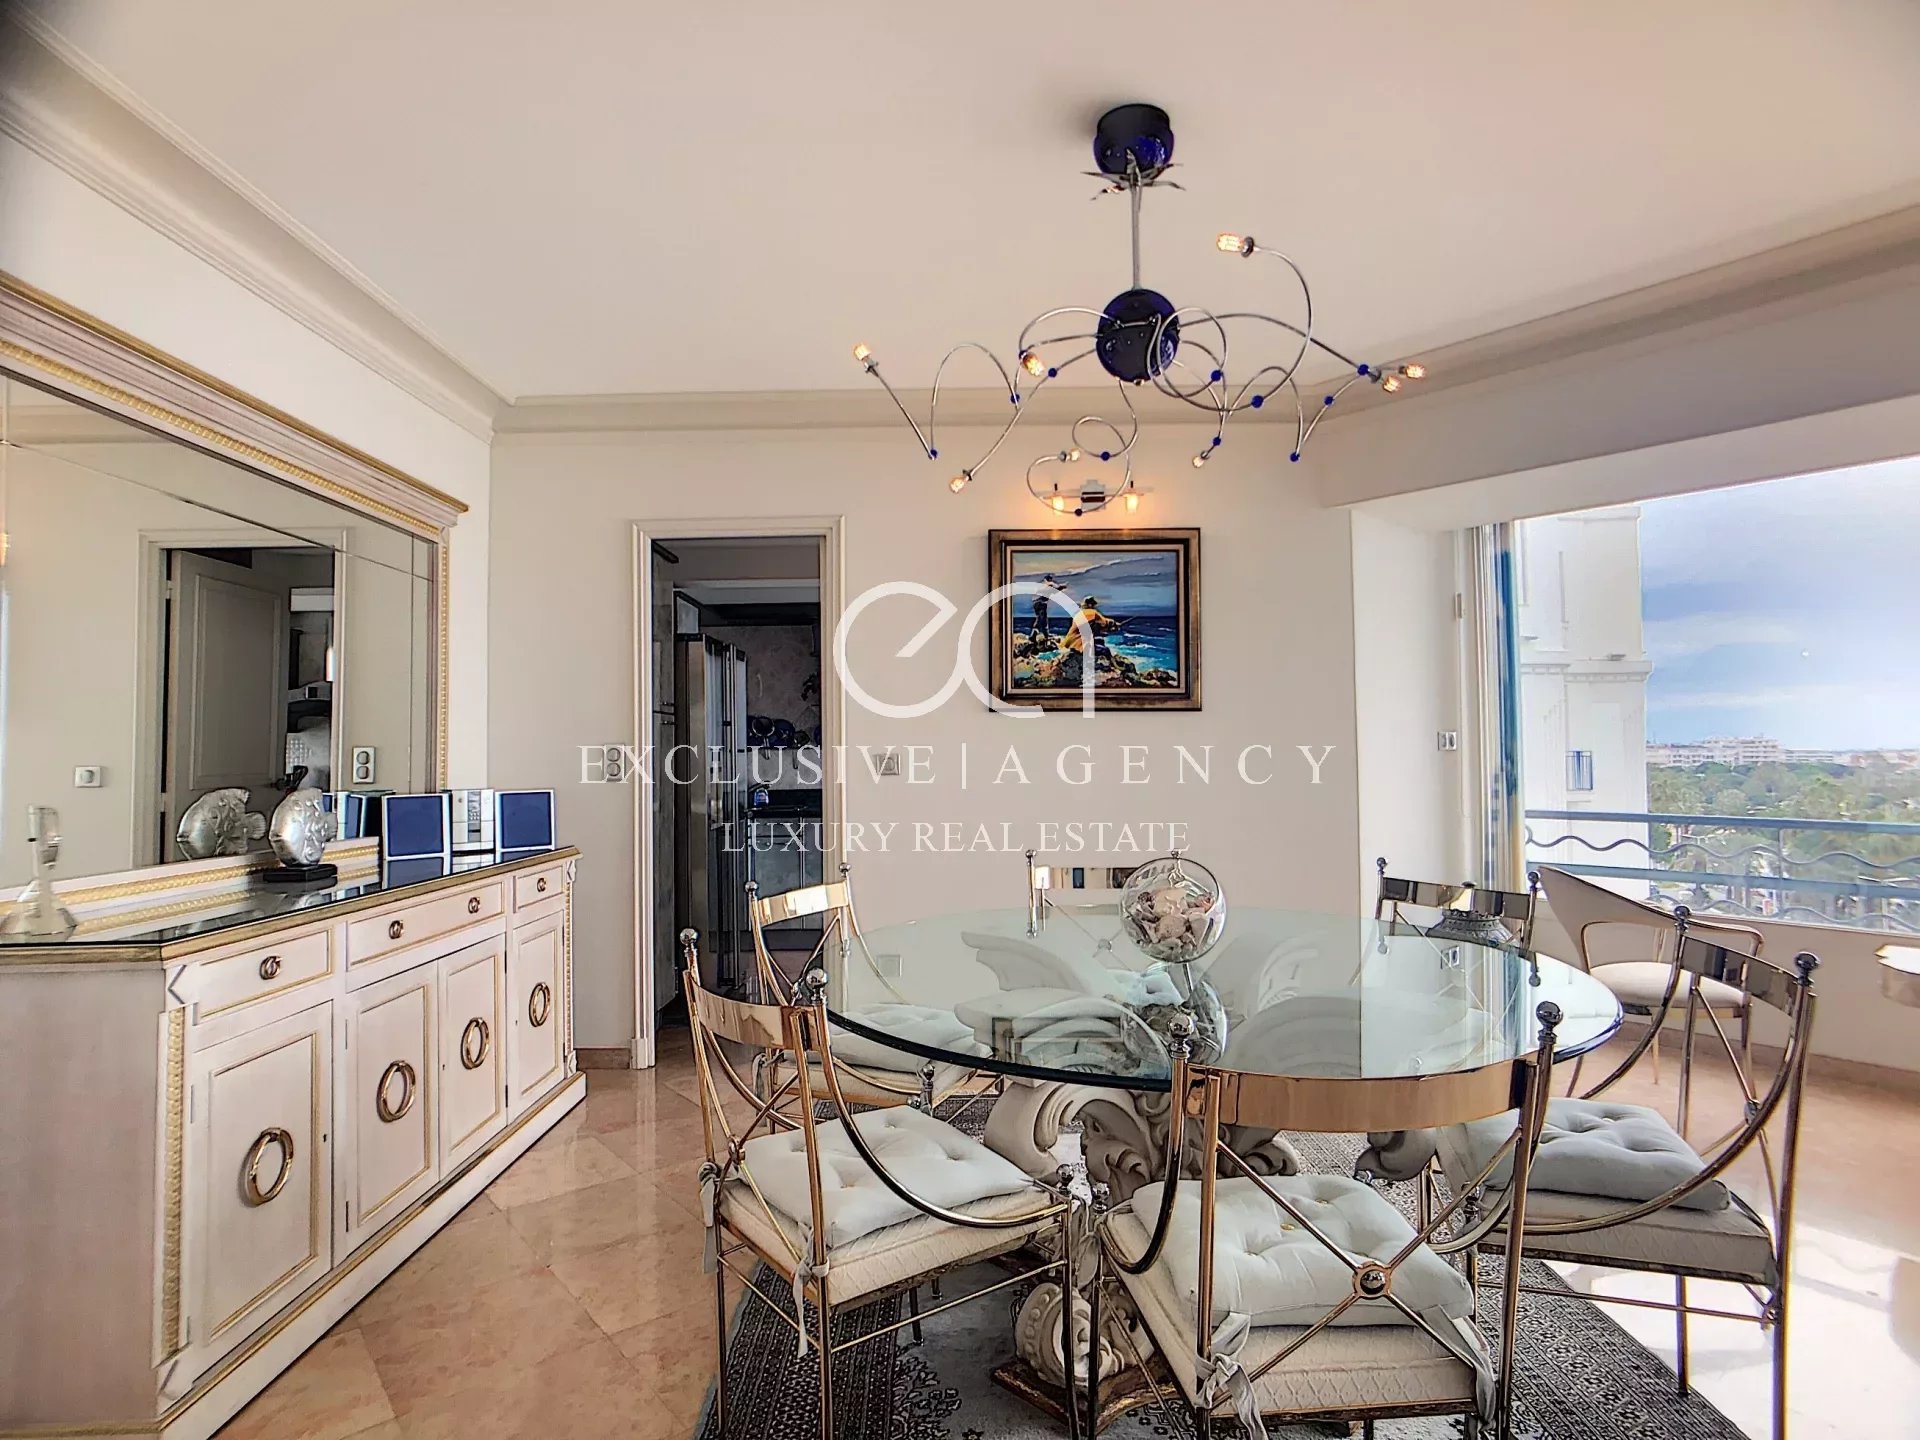 Short term rental Cannes Croisette 130sqm 3-bedroom apartment with terrace and sea view